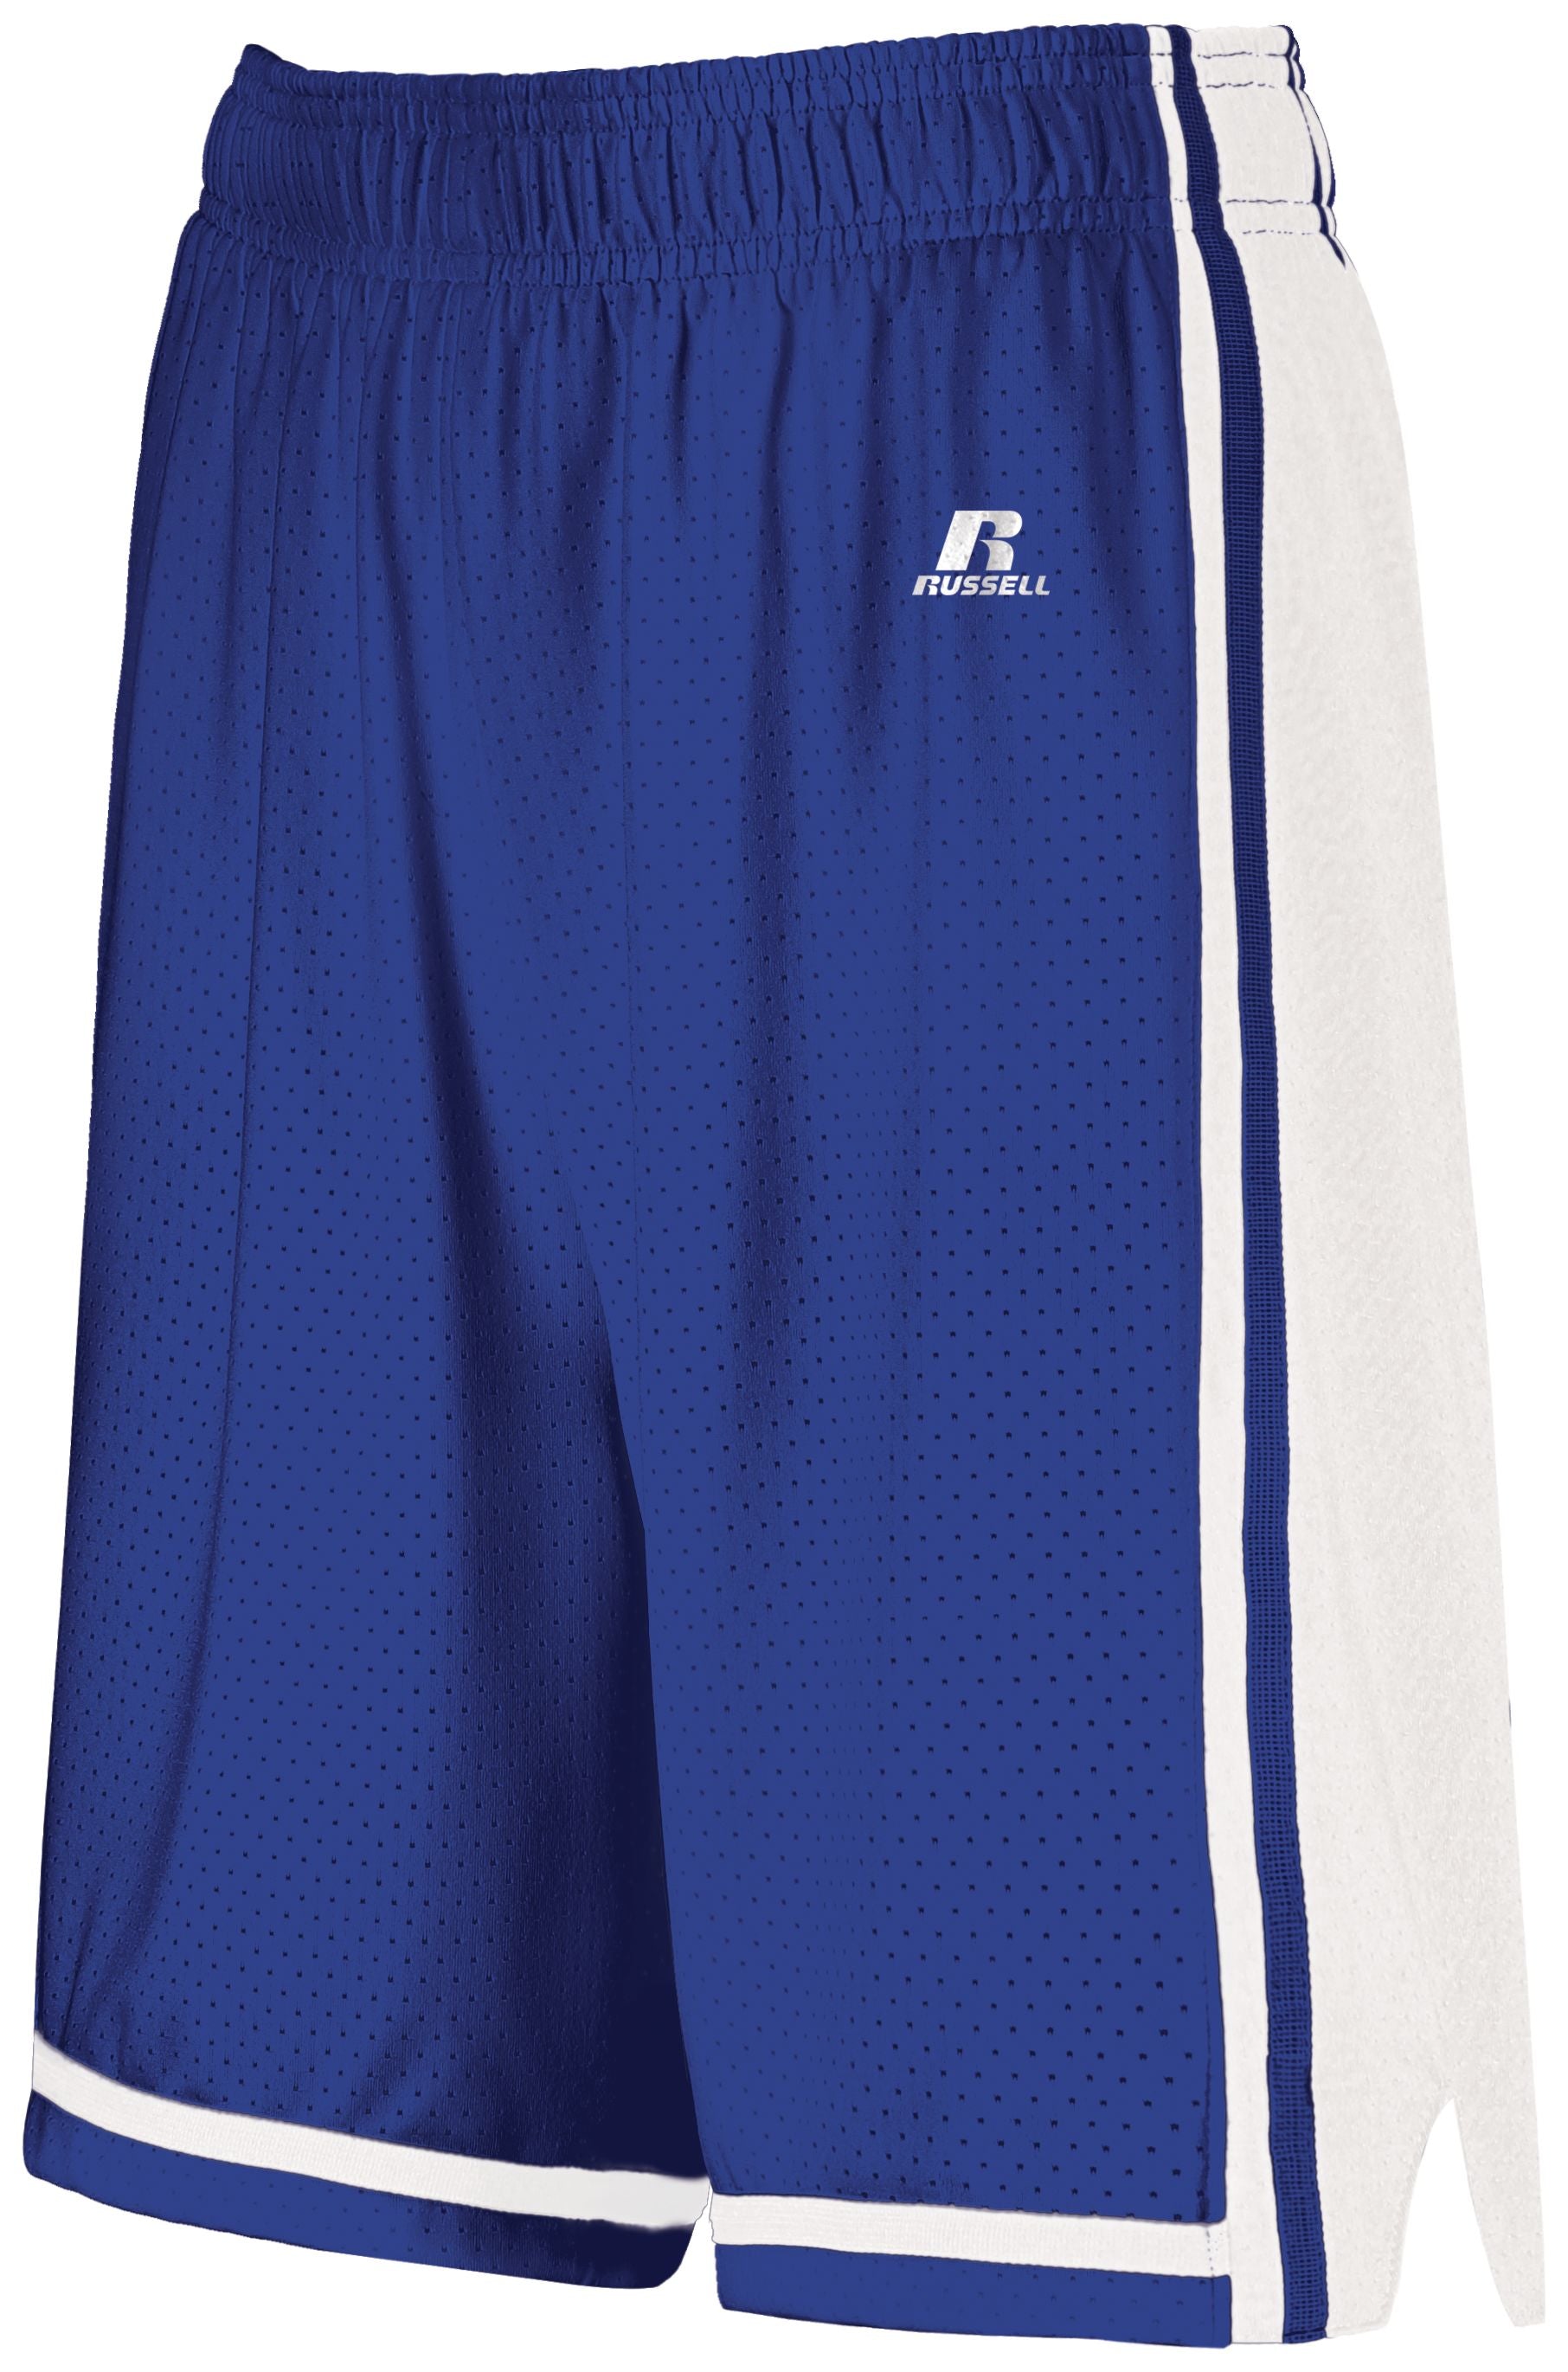 Russell Athletic Ladies Legacy Basketball Shorts in Royal/White  -Part of the Ladies, Ladies-Shorts, Basketball, Russell-Athletic-Products, All-Sports, All-Sports-1 product lines at KanaleyCreations.com